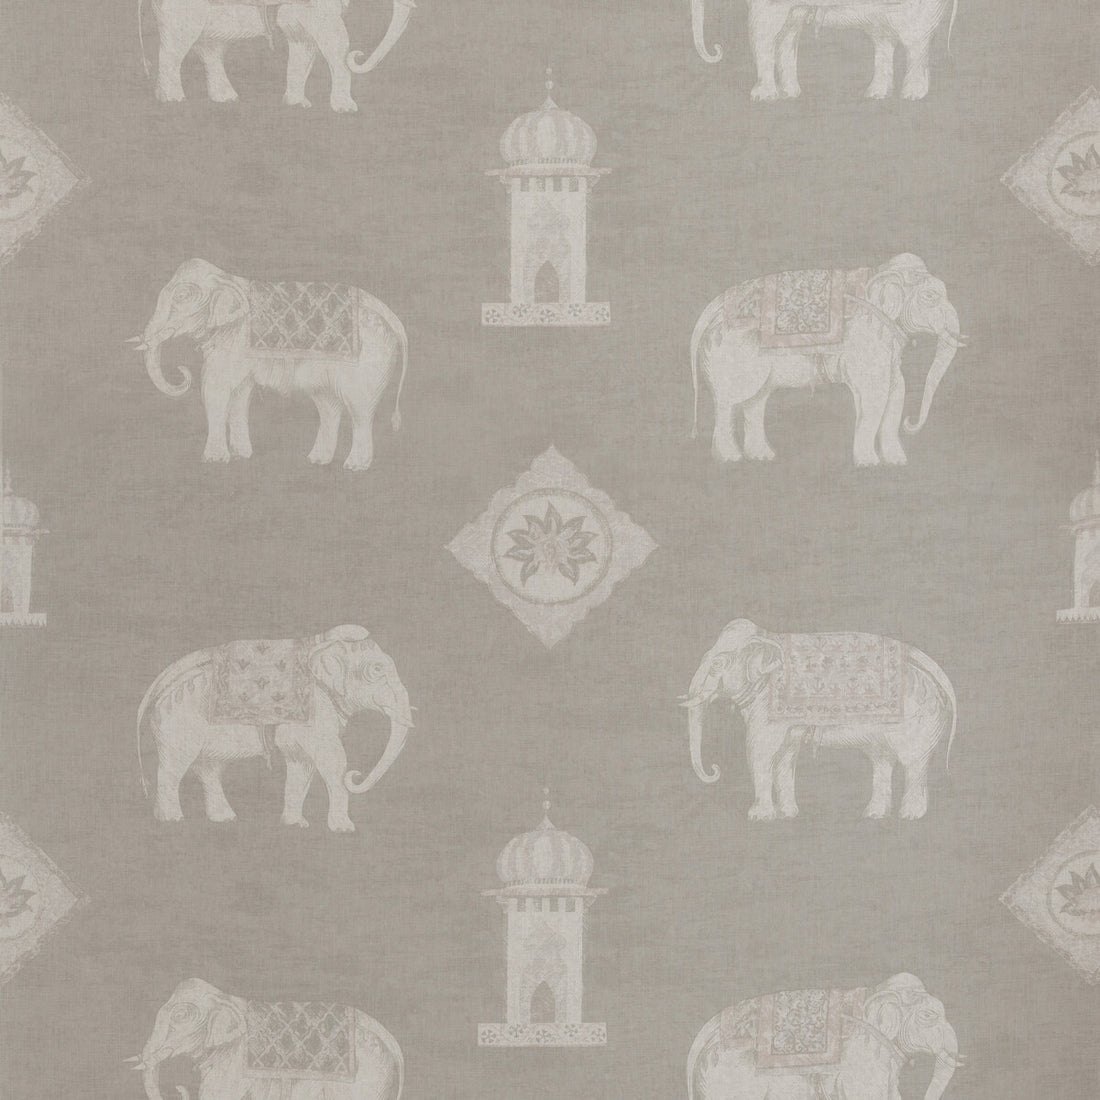 Jumbo fabric in stone color - pattern AM100315.11.0 - by Kravet Couture in the Andrew Martin Gobi collection